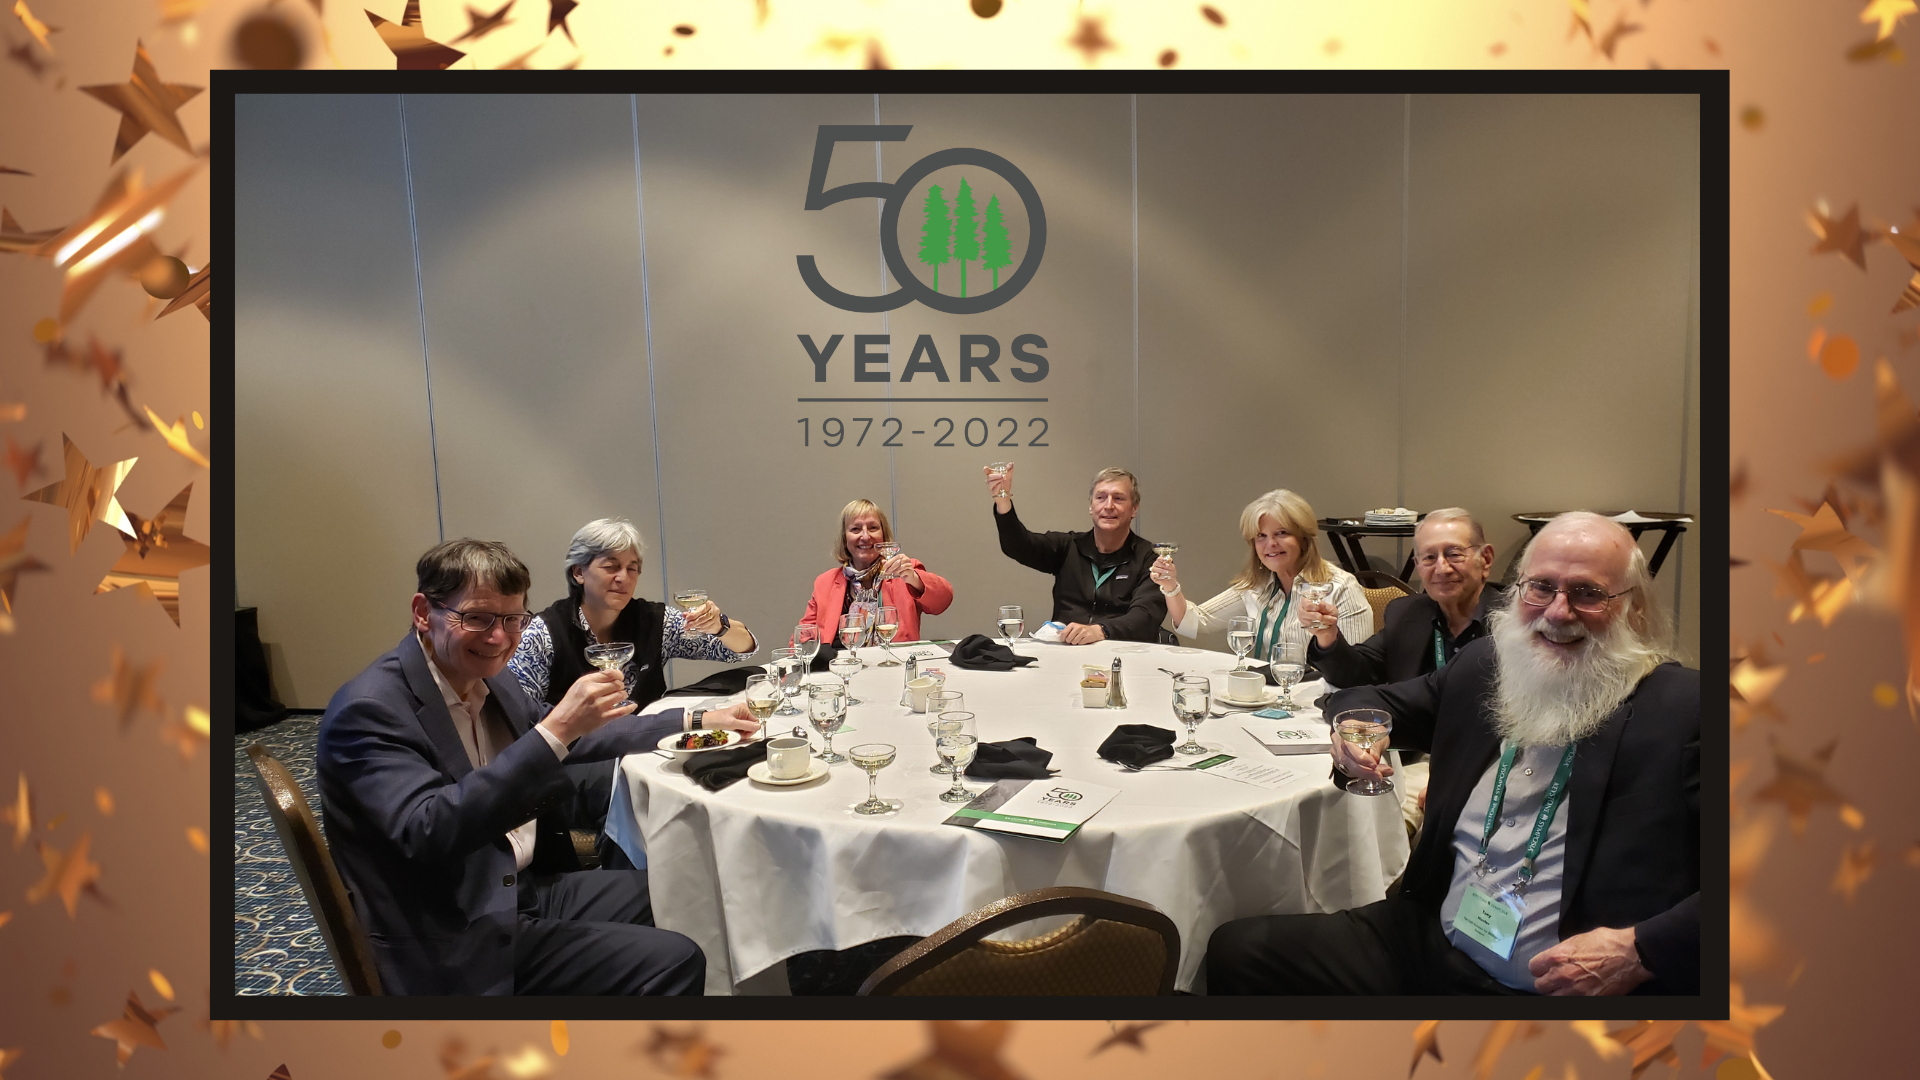 Cheers to 50 years of Keystone Symposia